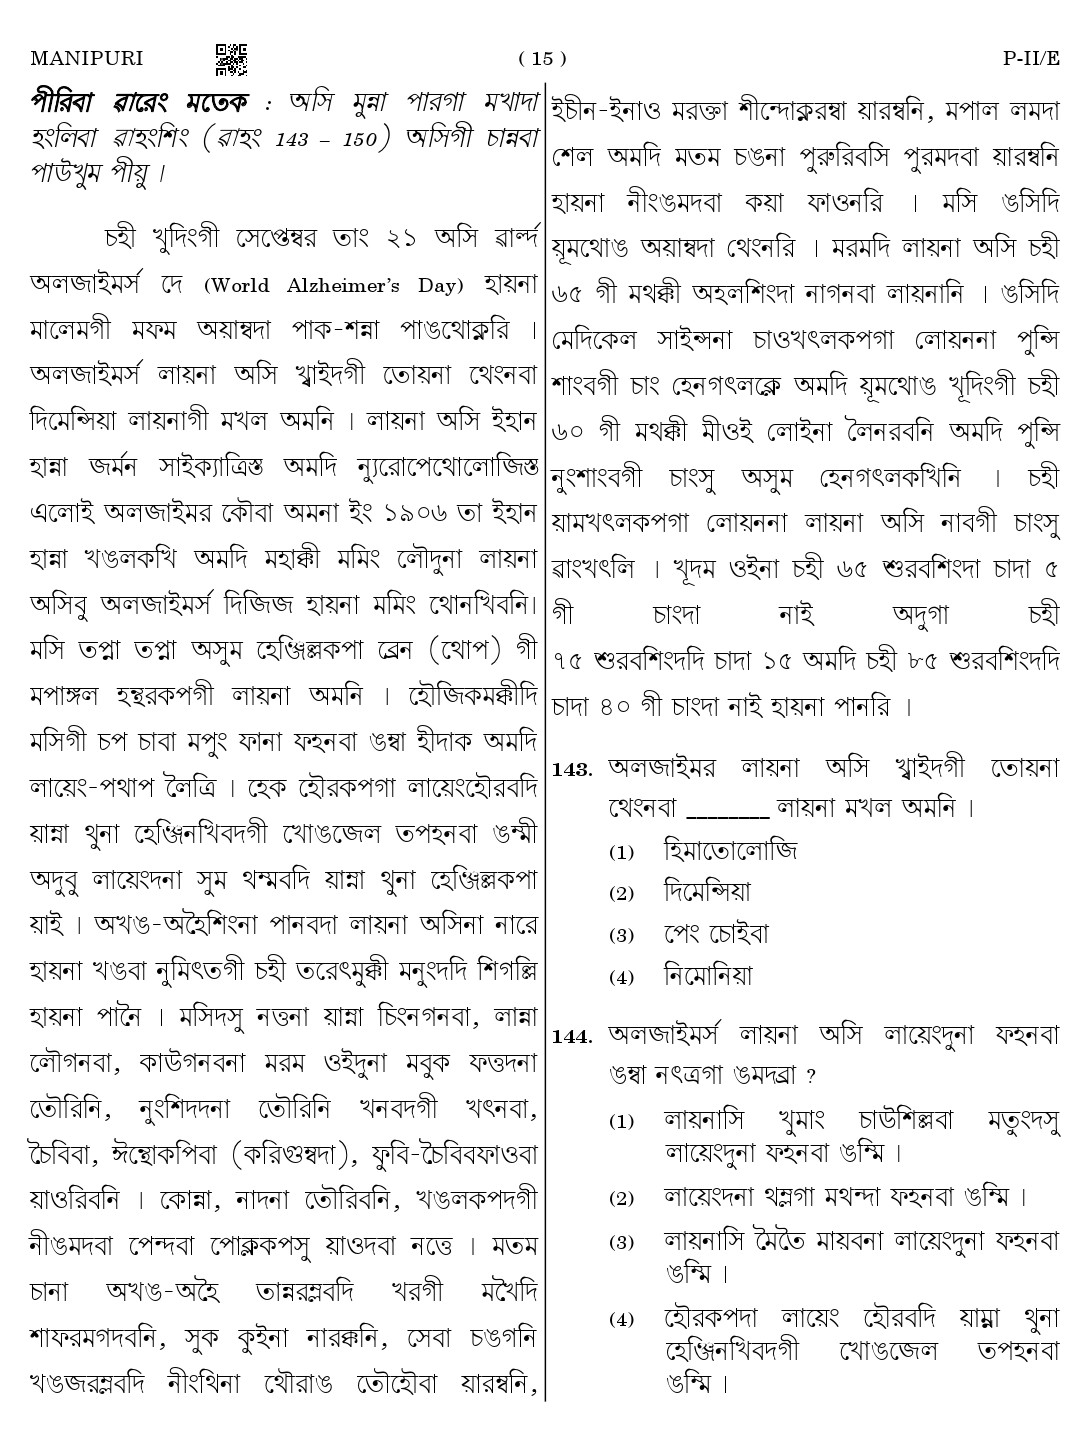 CTET August 2023 Manipuri Language Supplement Paper II Part IV and V 15